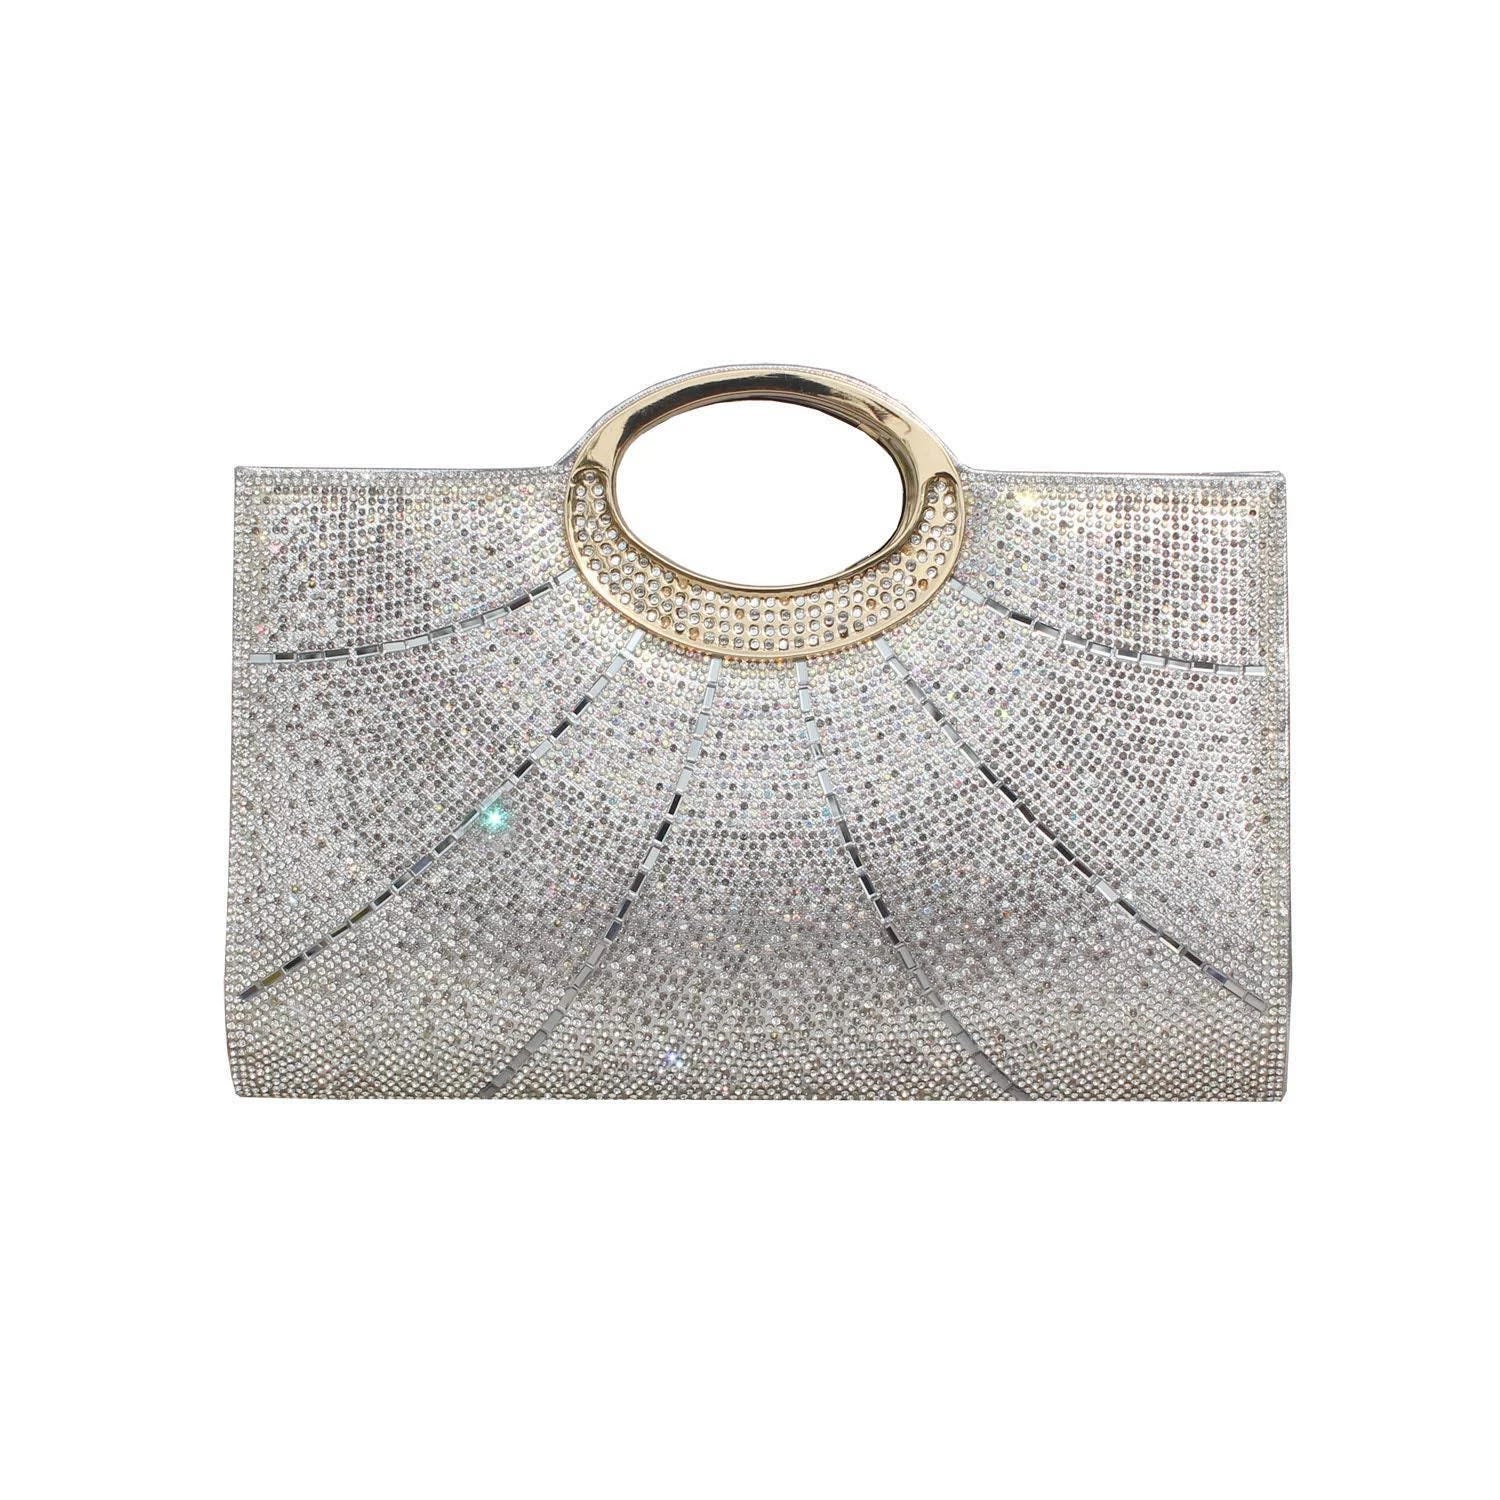 Luxurious Rhinestone Sparkly Silver Clutch for Formal Occasions | Image